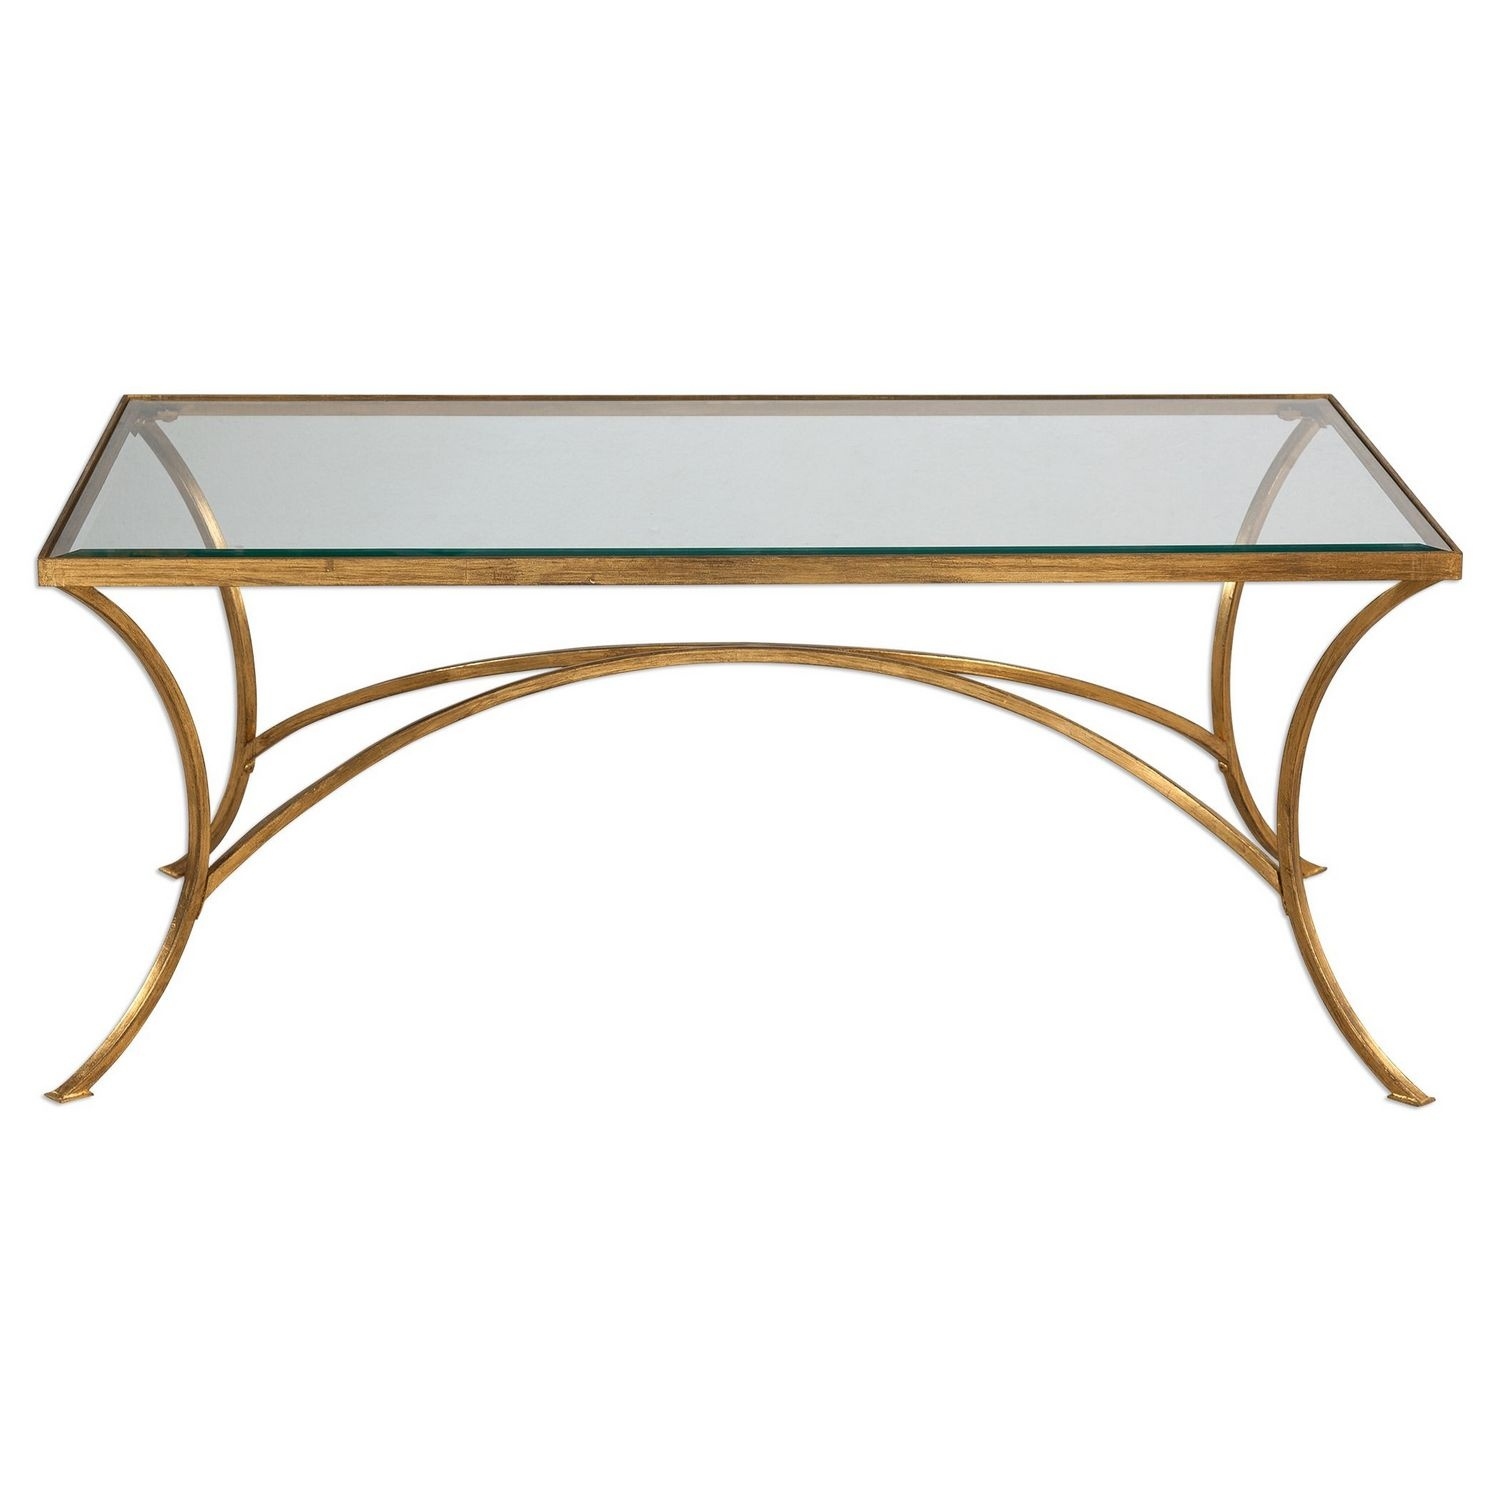 Uttermost Alayna Coffee Table - Gold